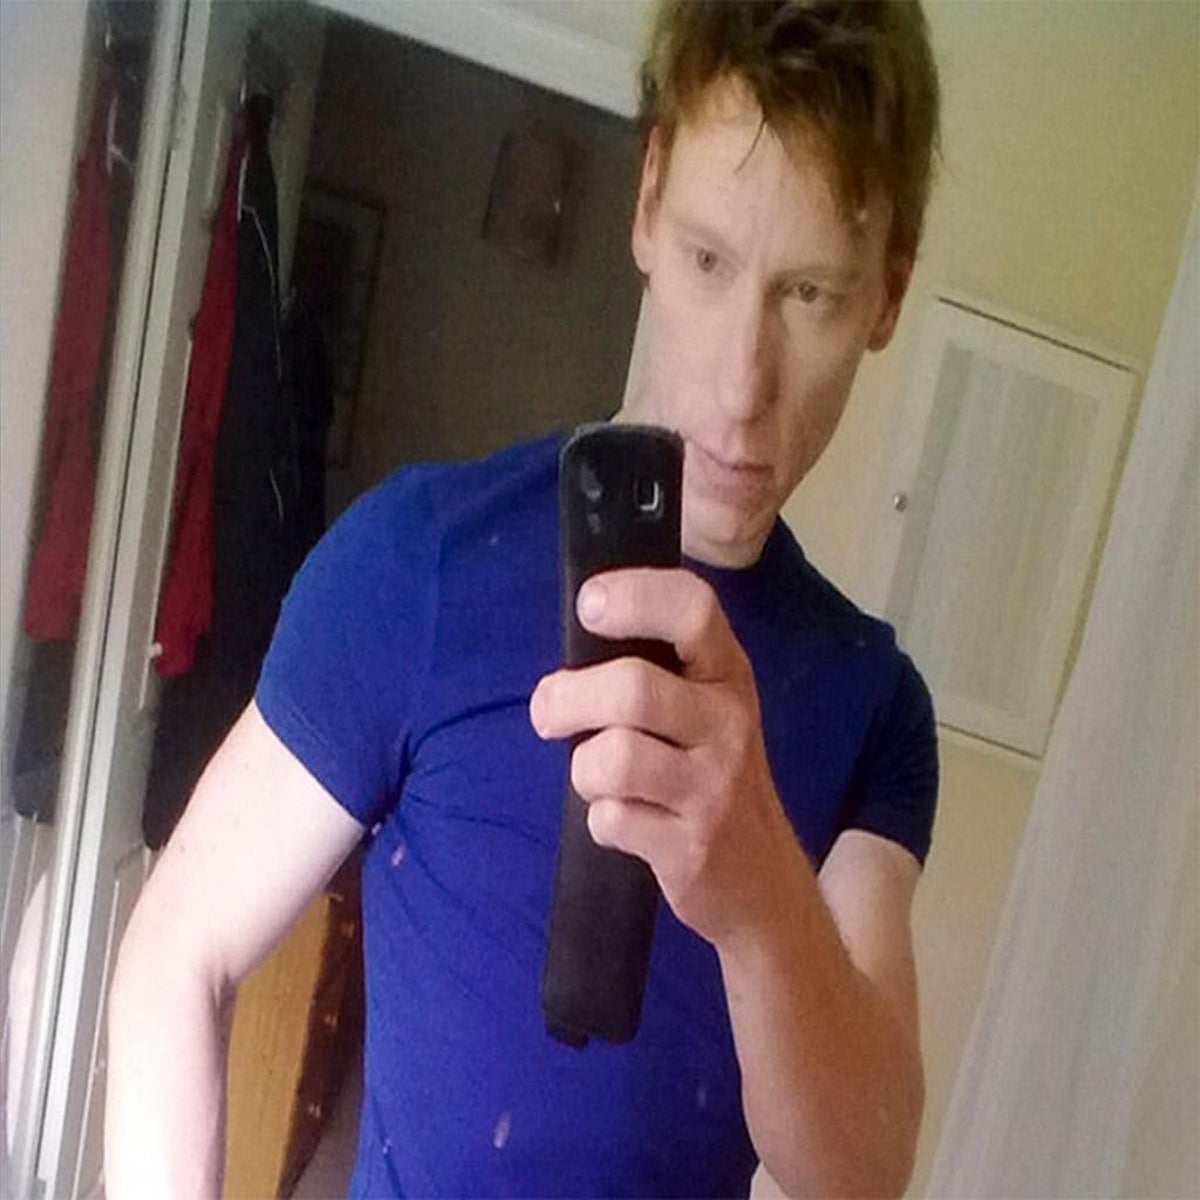 Asian Drugged Gay Porn - Stephen Port: Chef accused of killing four gay men was obsessed with 'drug  rape porn', court hears | The Independent | The Independent